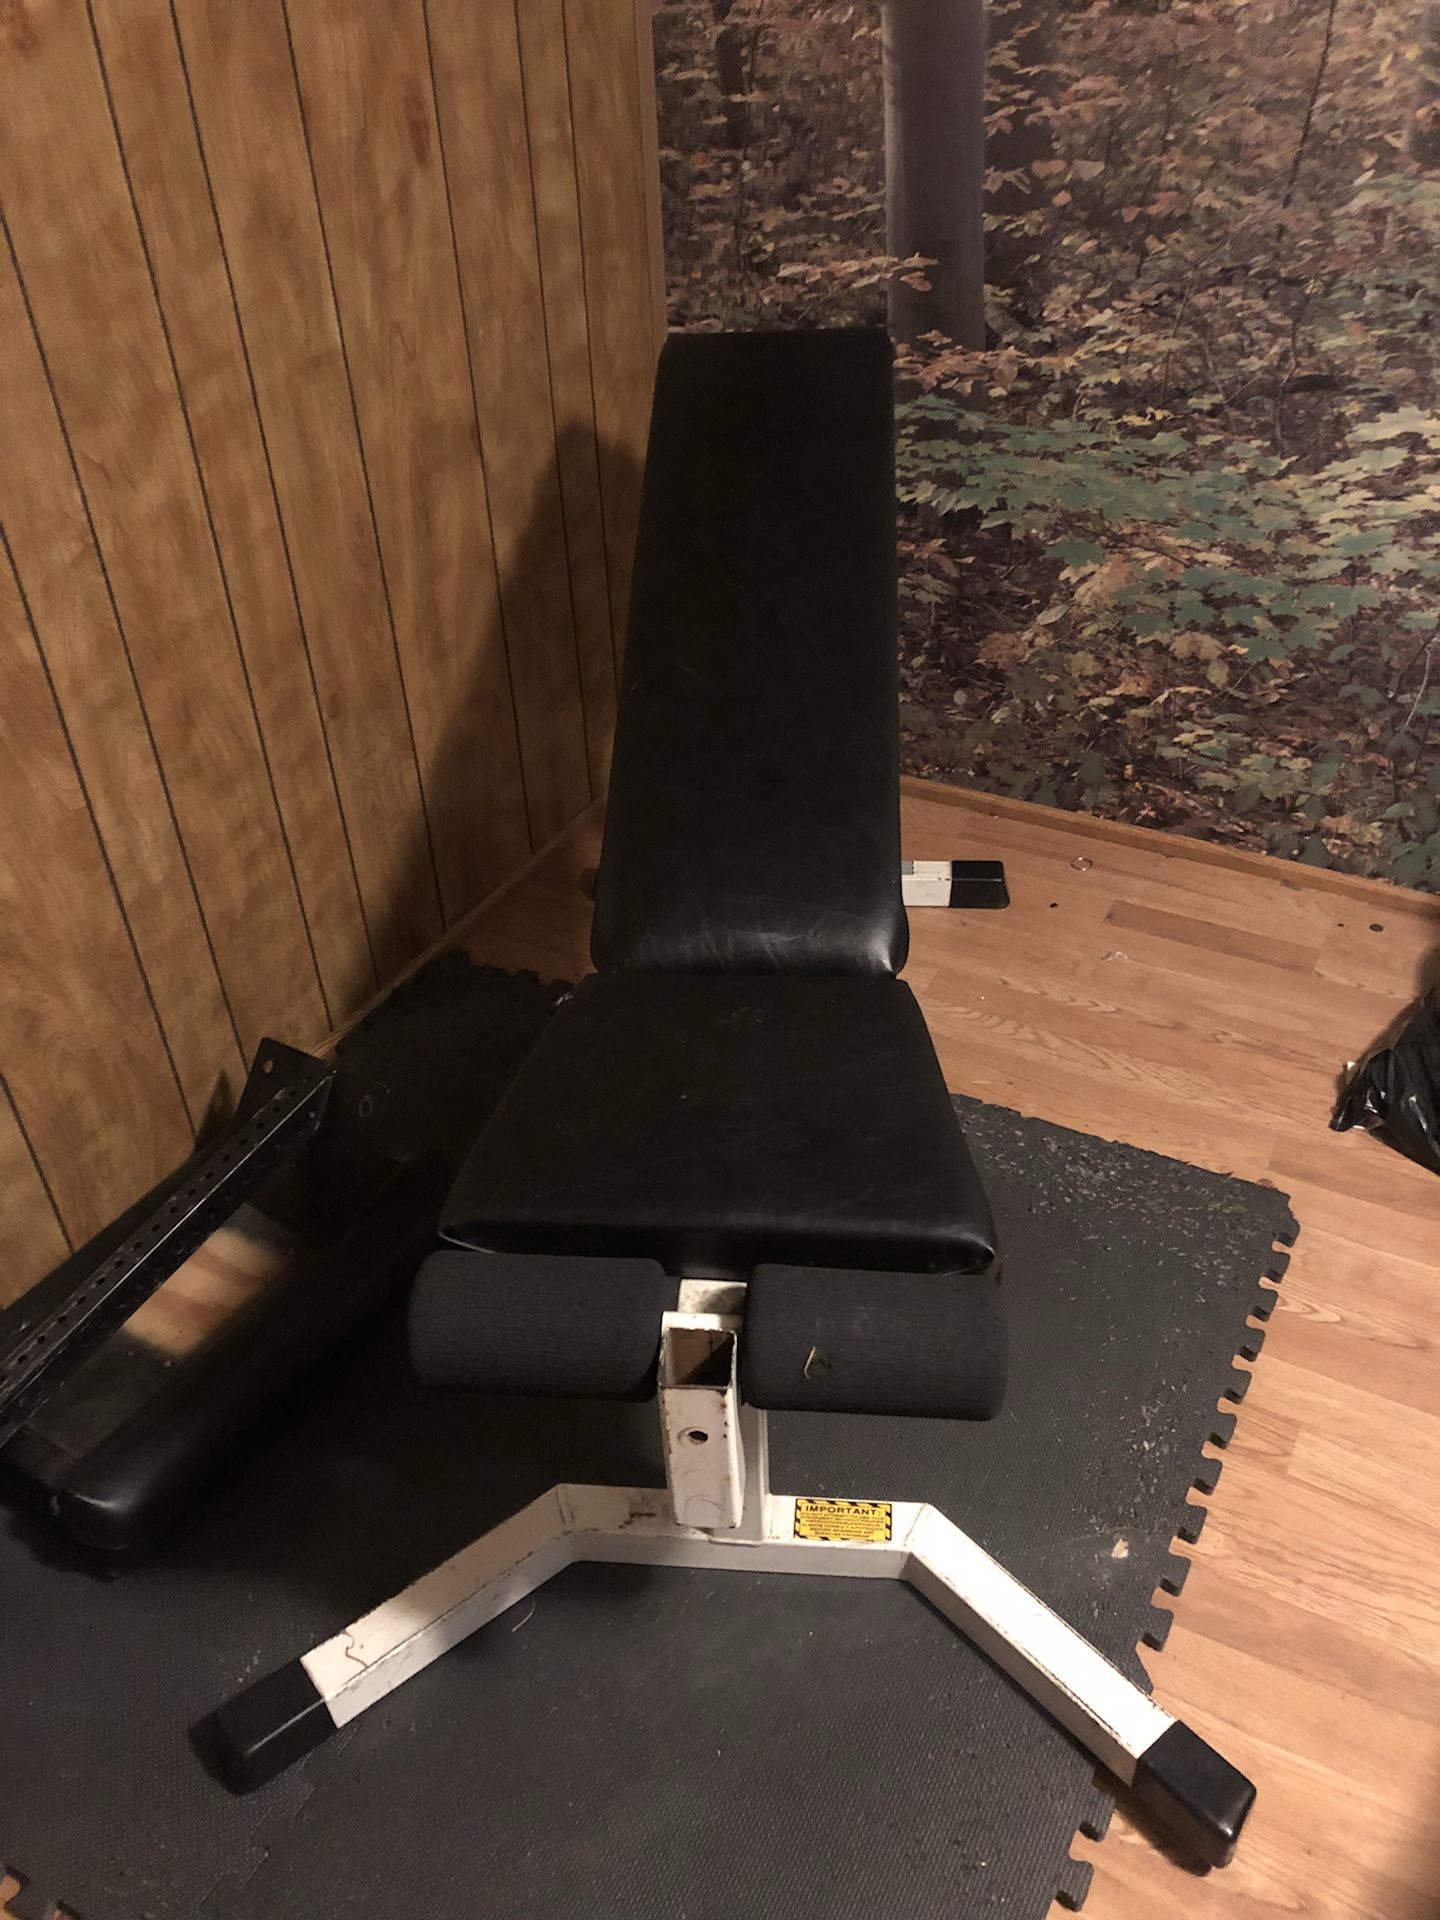 Adjustable workout bench, ab bench, curling bar and various weights